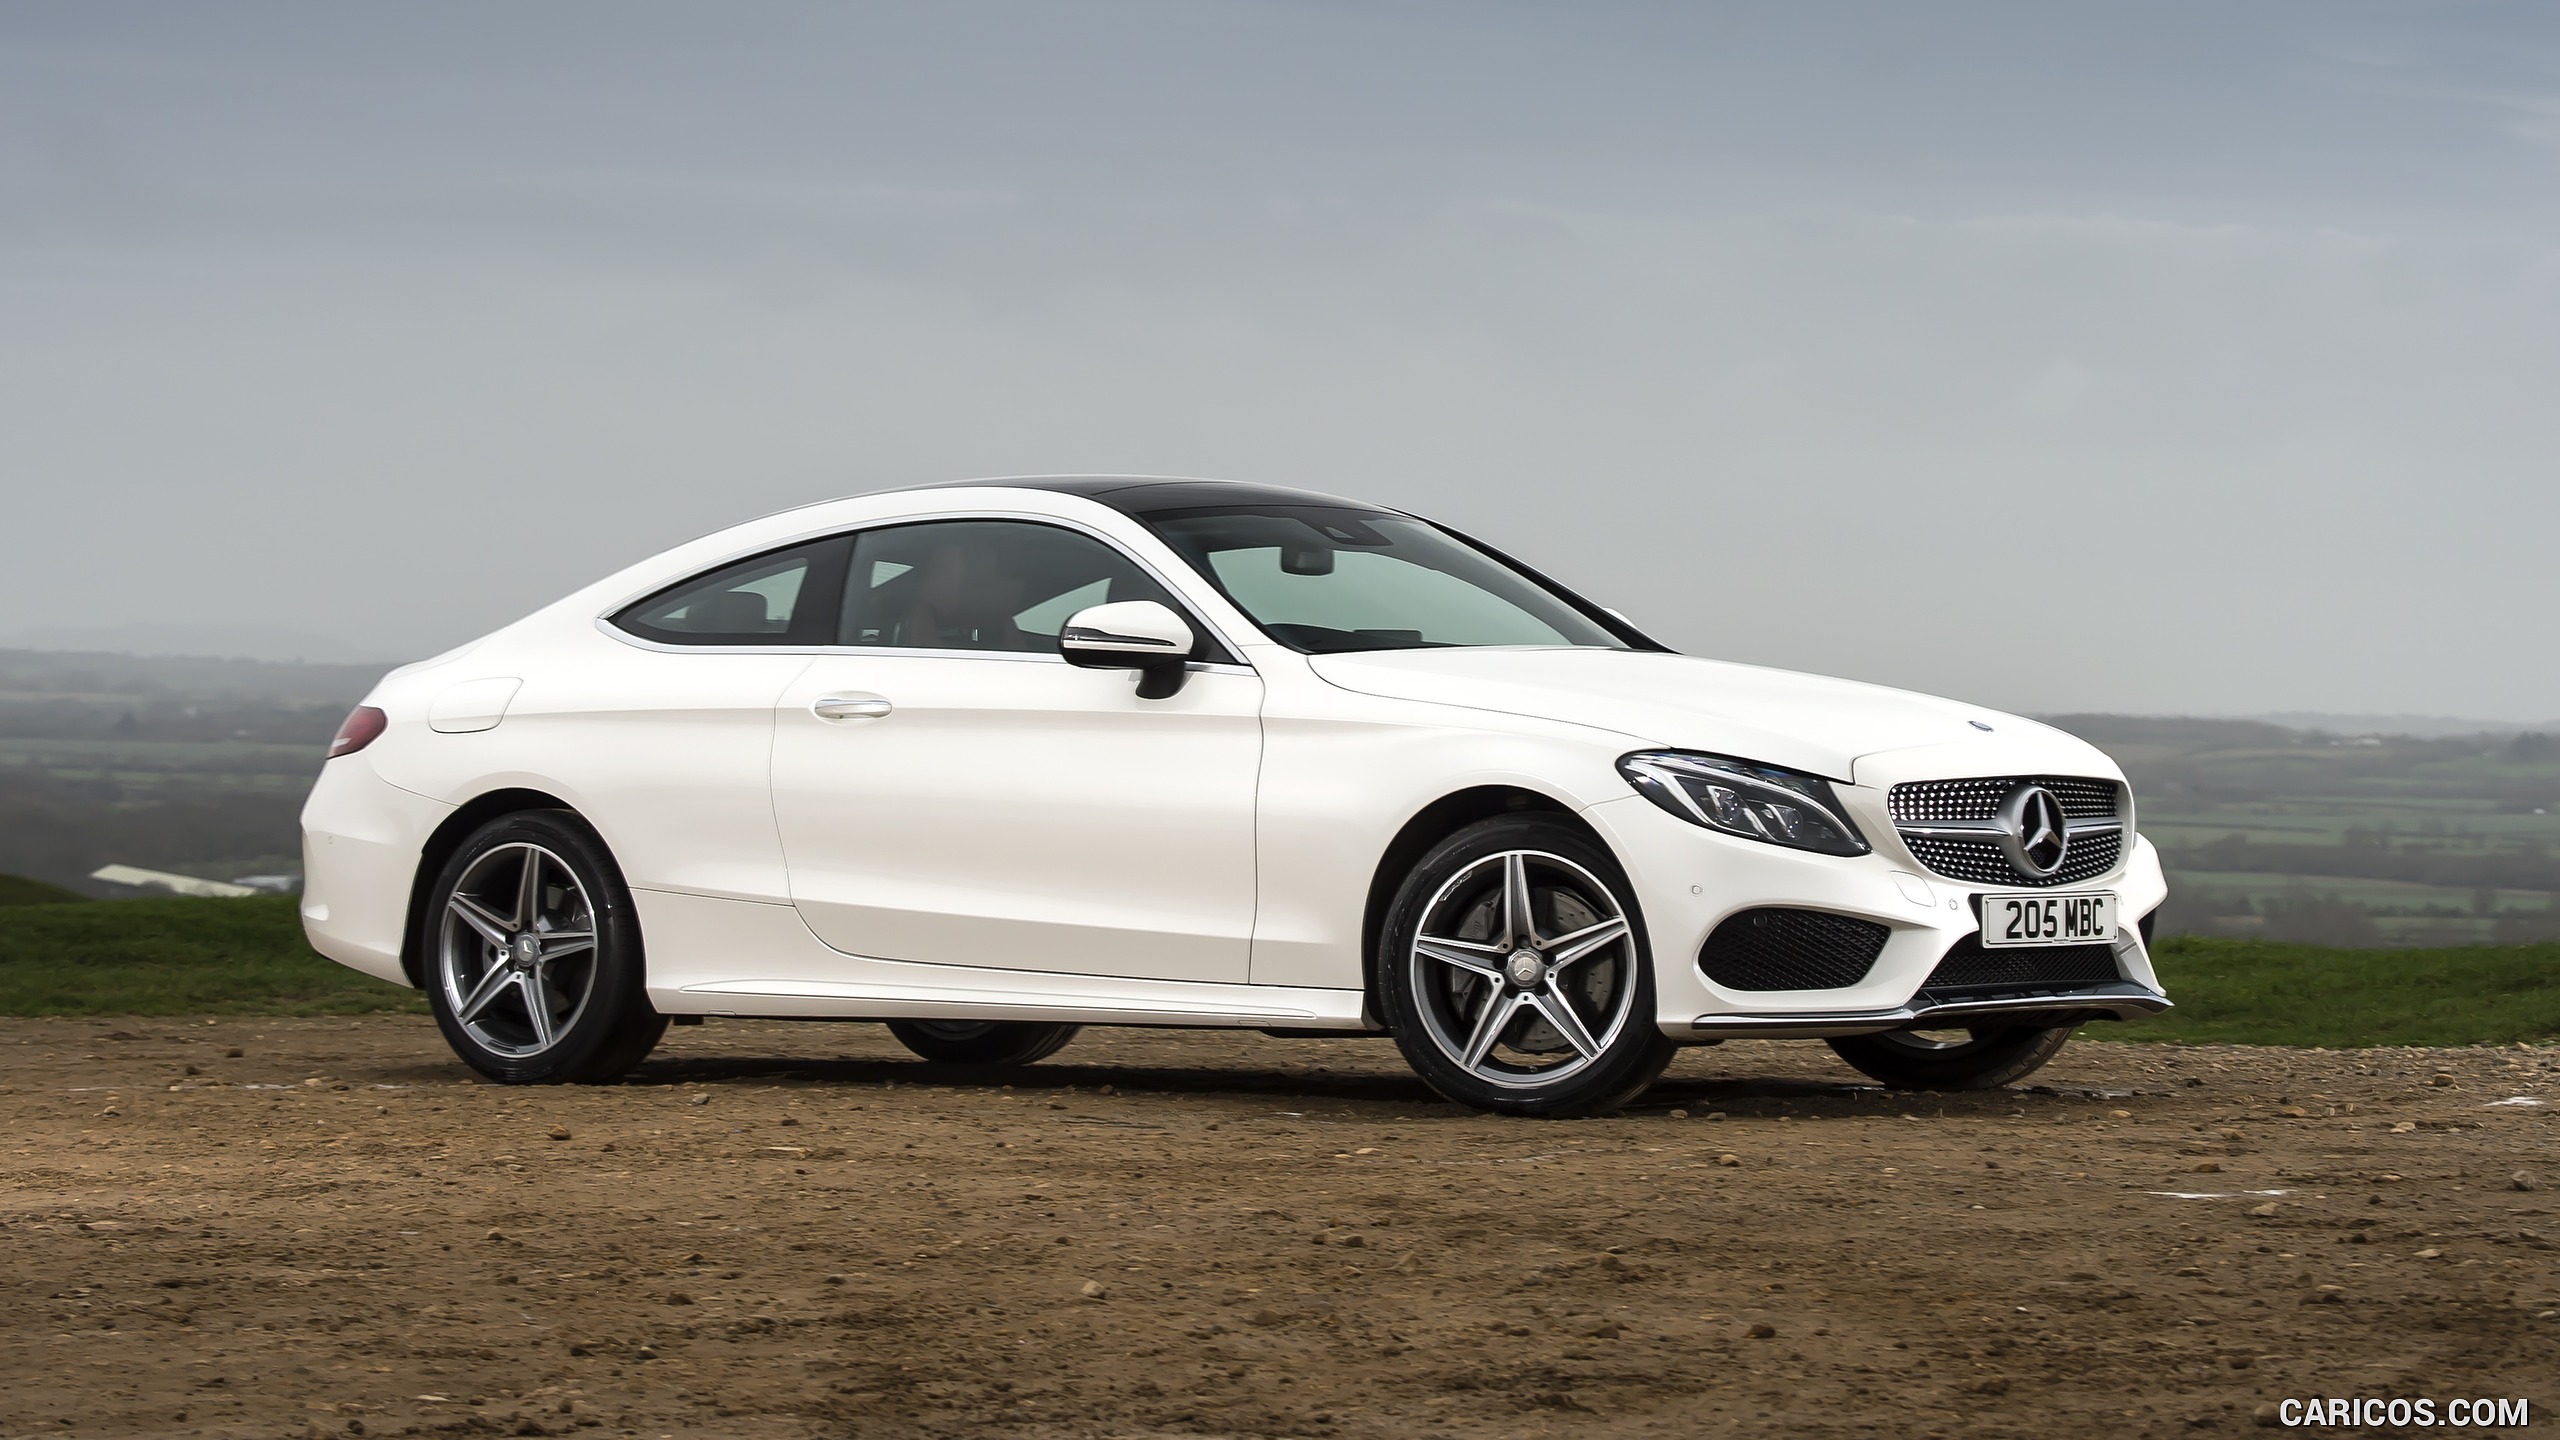 2017 Mercedes-Benz C-Class Coupe (UK-Spec) - Side, #109 of 210